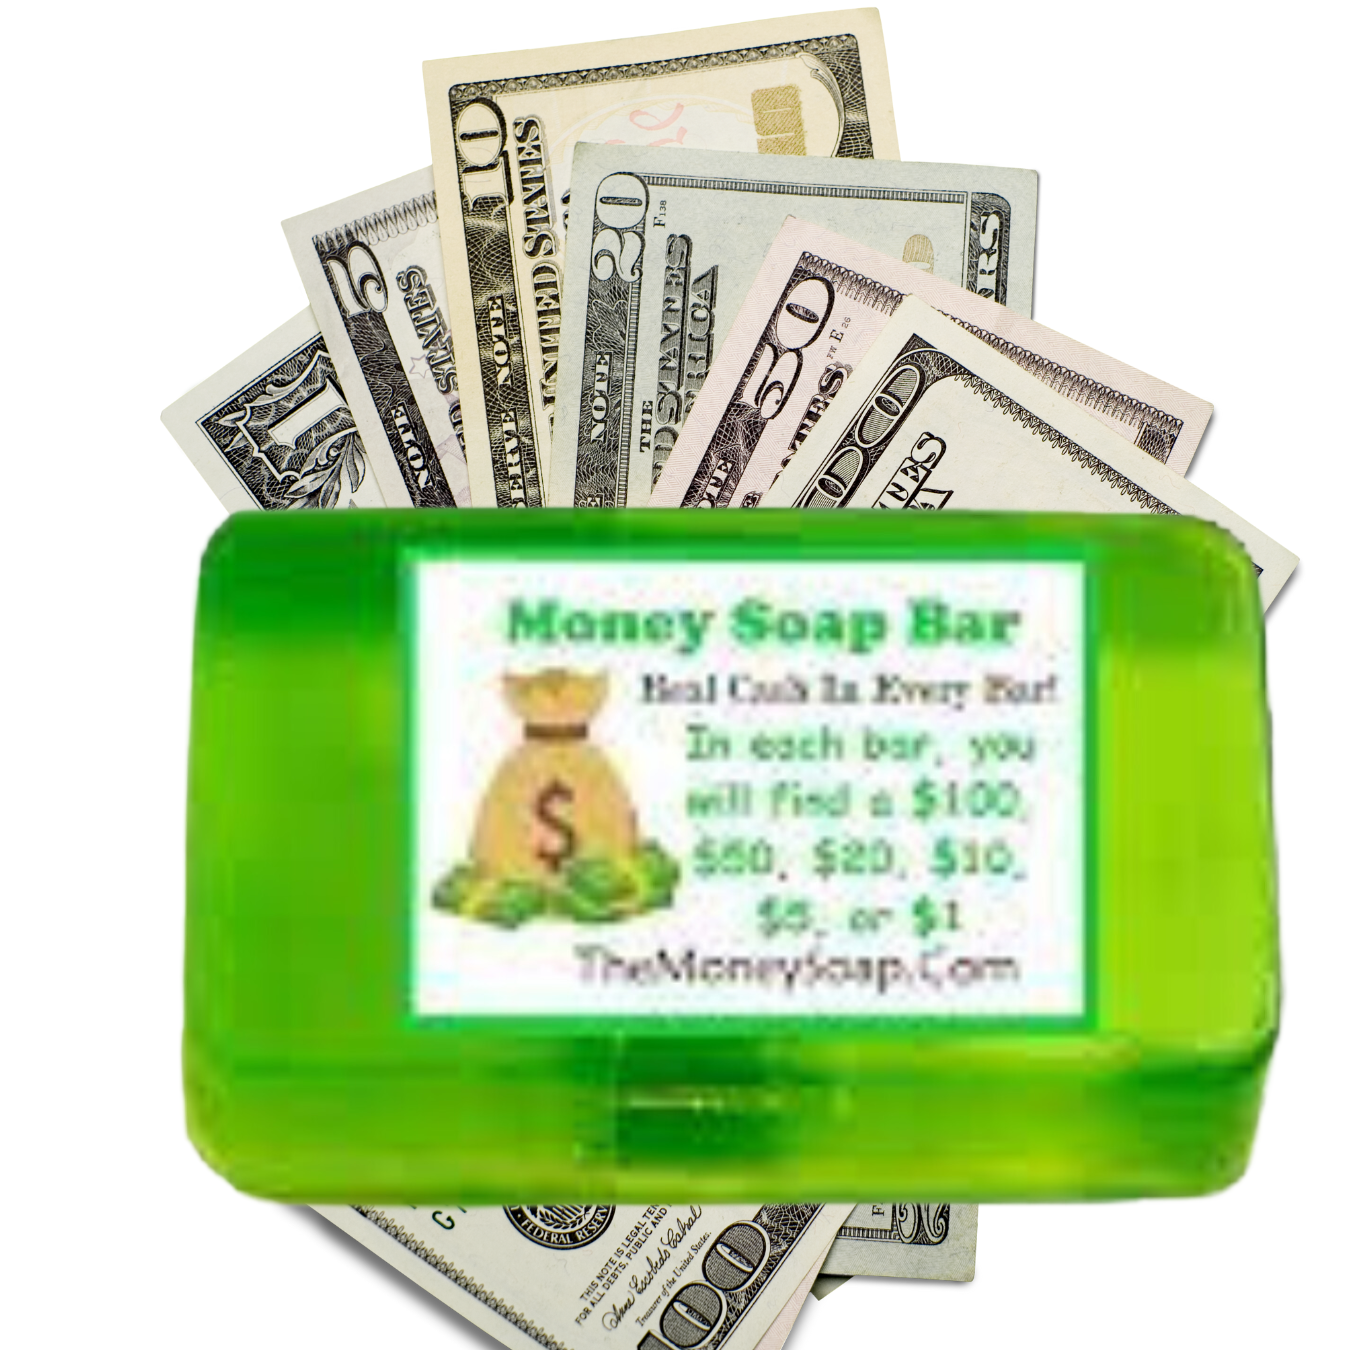 Money Soap Bar with real  money inside